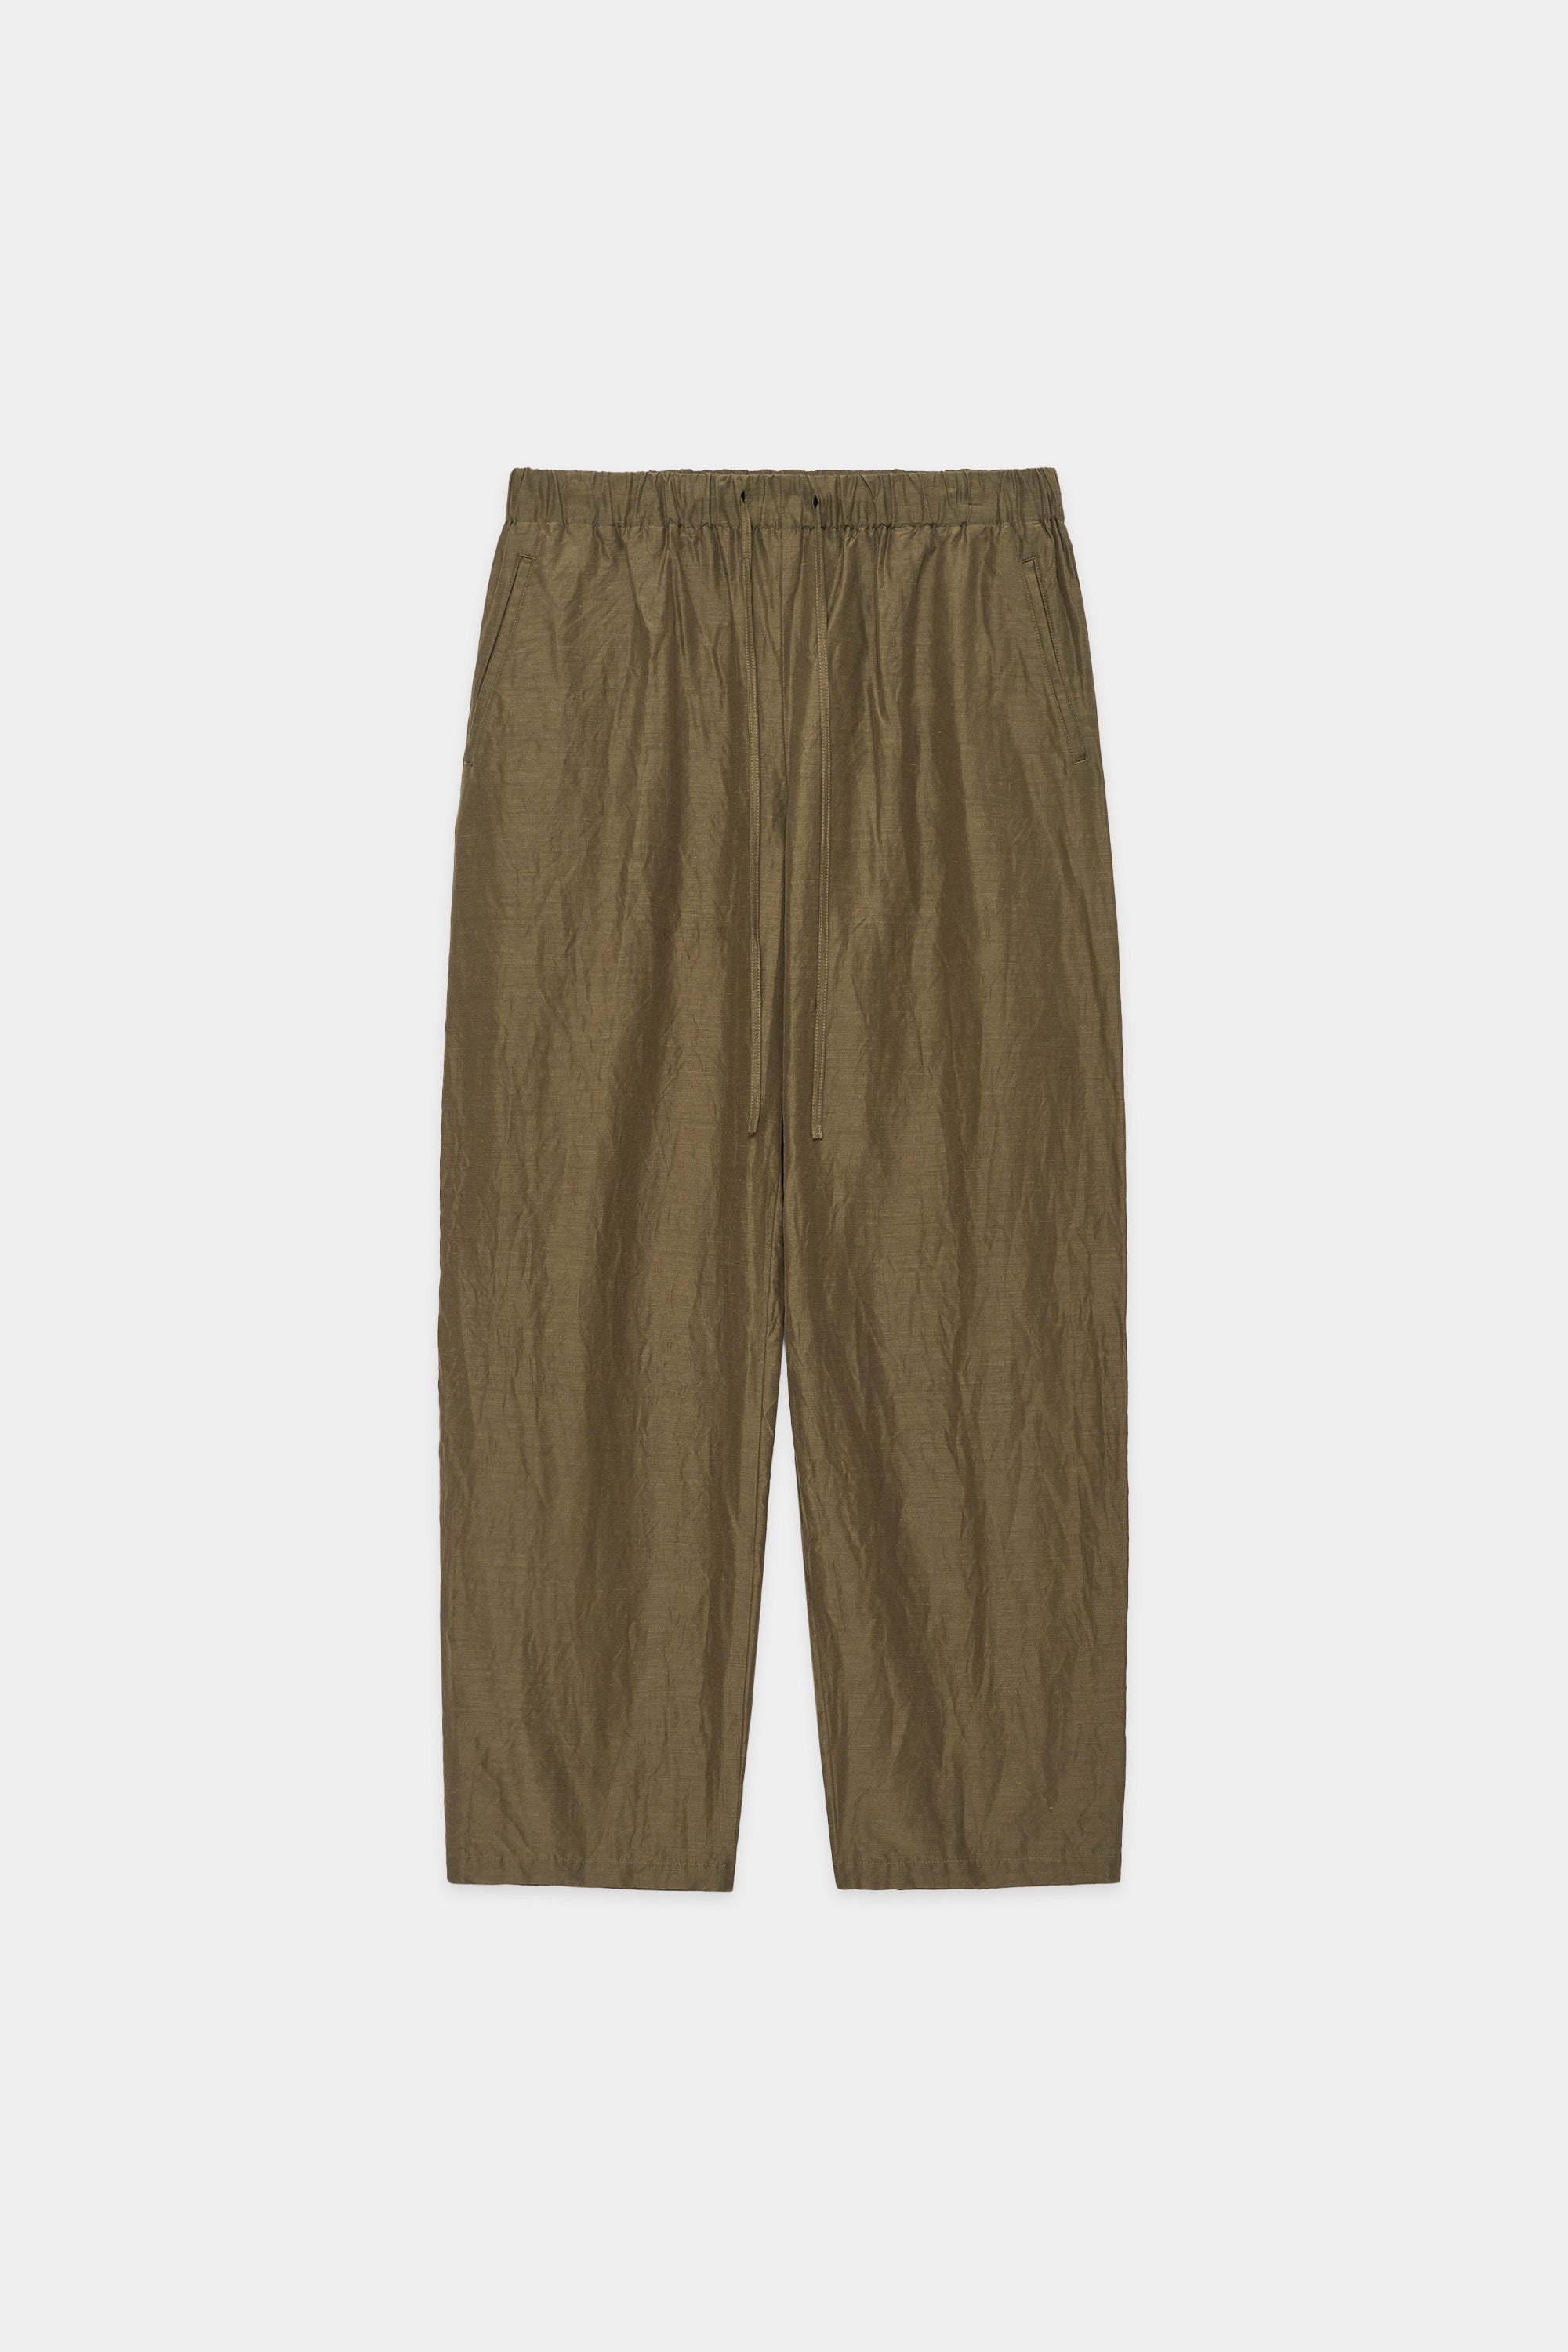 CUPRO LINEN NEP CLOTH COCOON FIT EASY PANTS, Olive Khaki